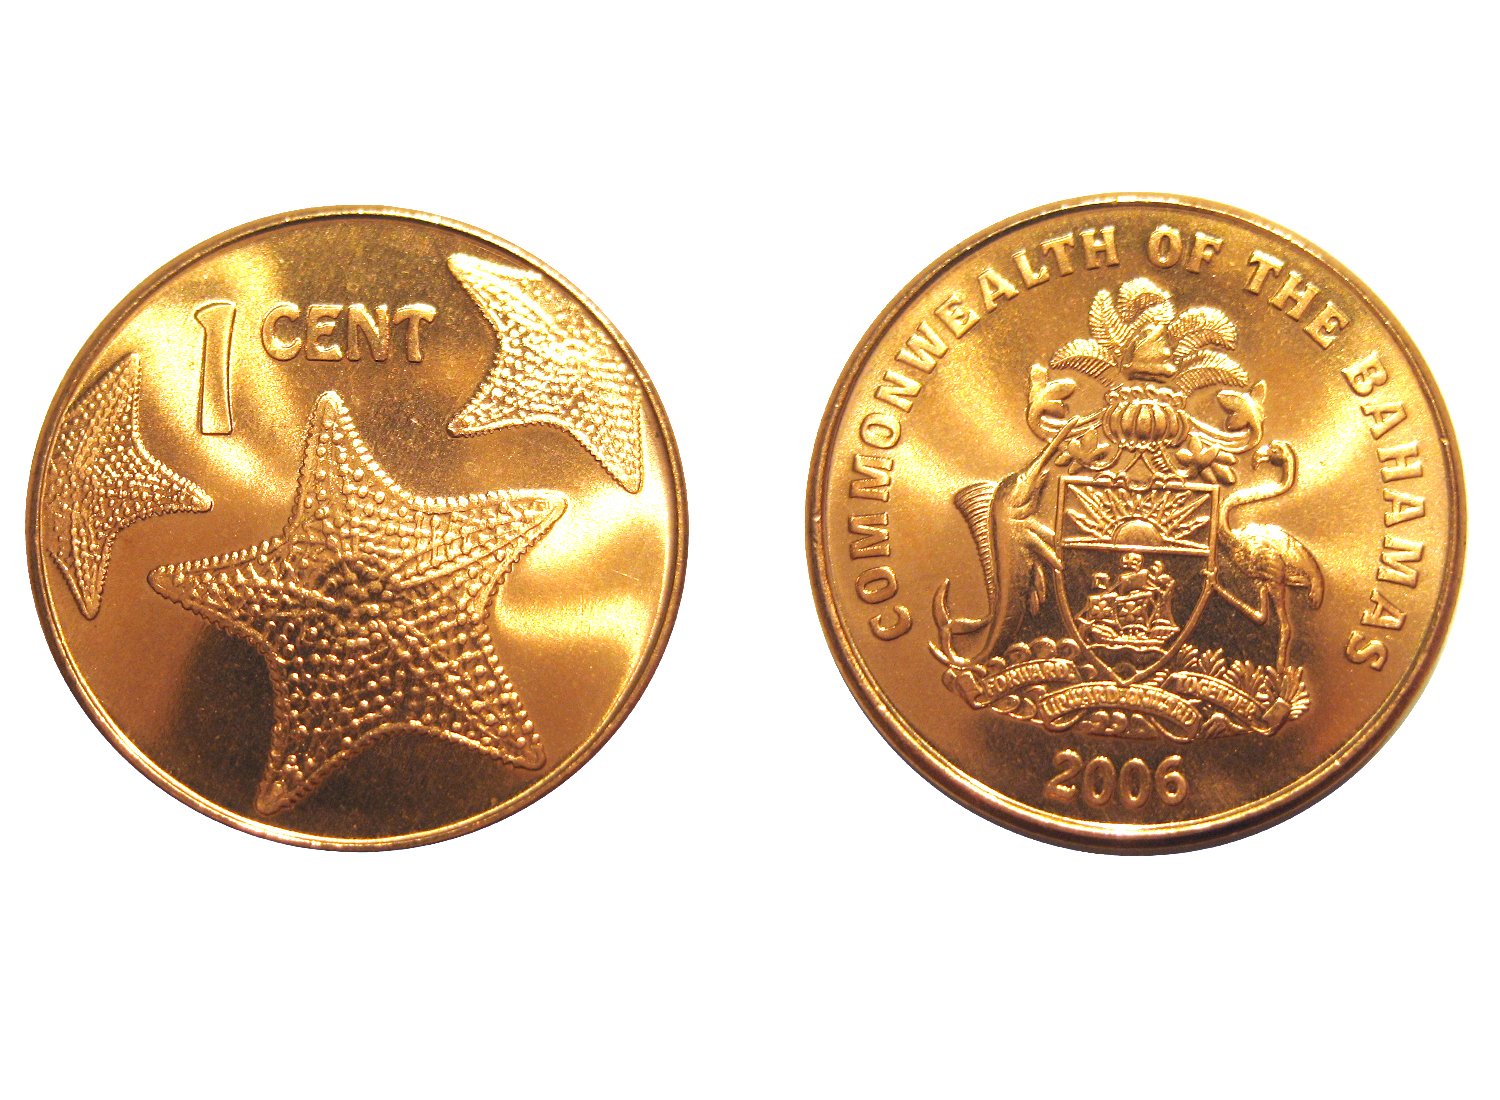 the gold coin is next to an image of the king